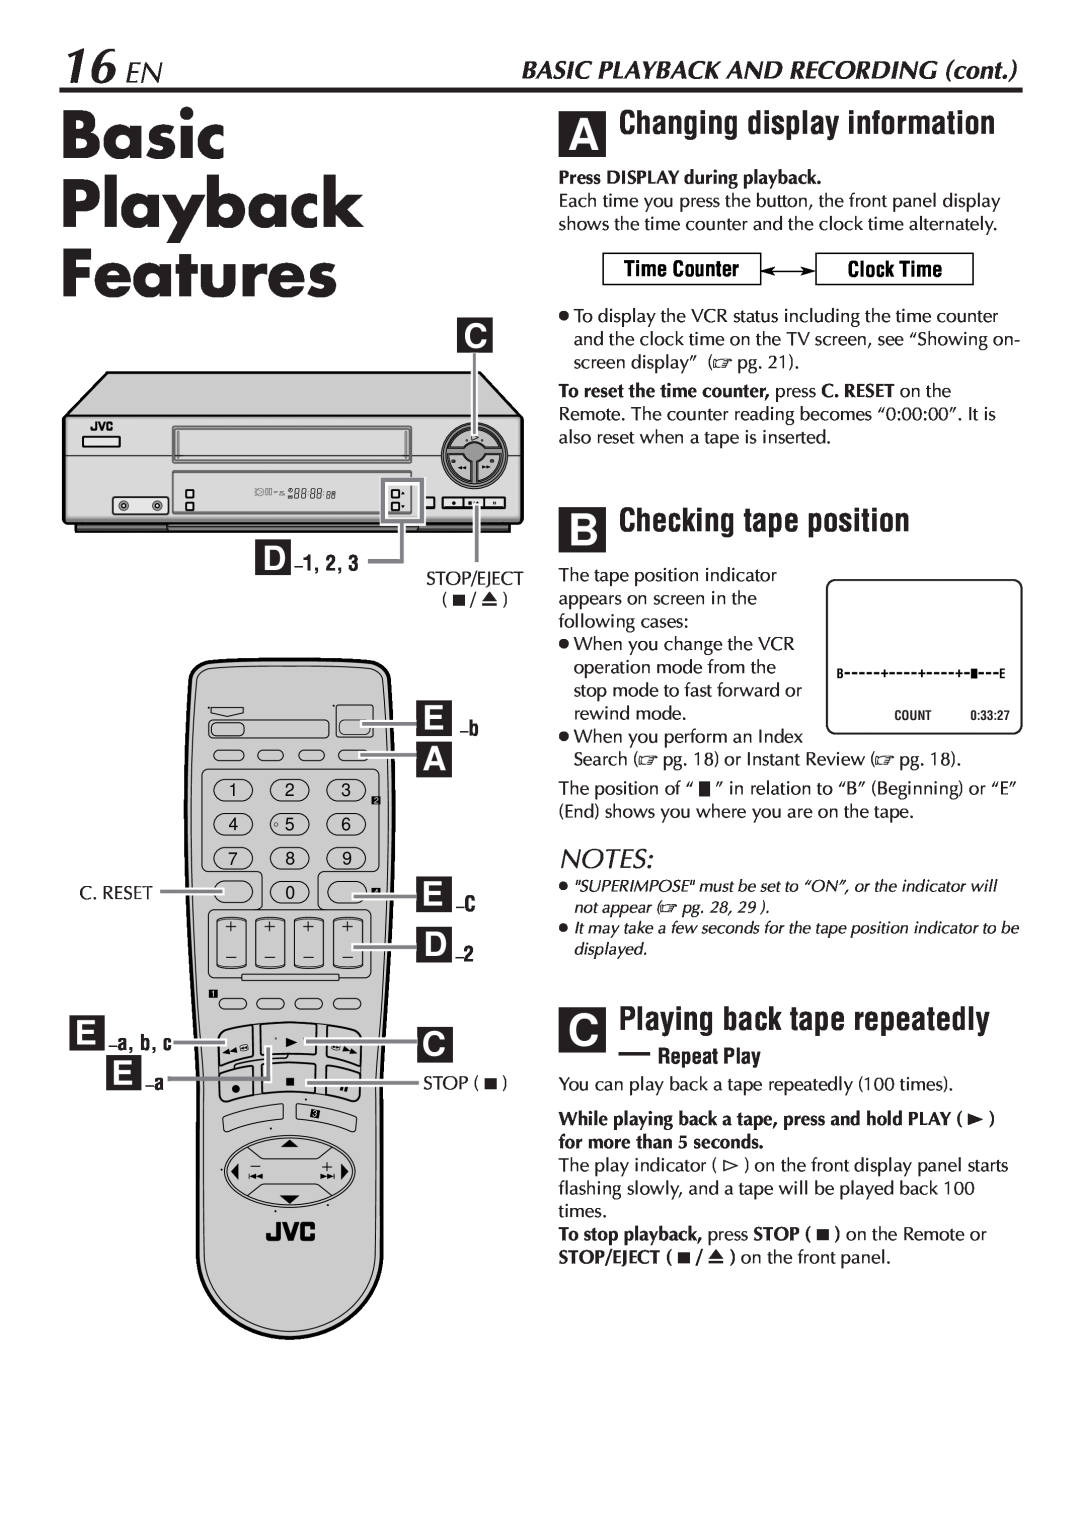 JVC HR-A47U manual Basic Playback Features, 16 EN, E -b, D, A Changing display information, B Checking tape position, E -C 